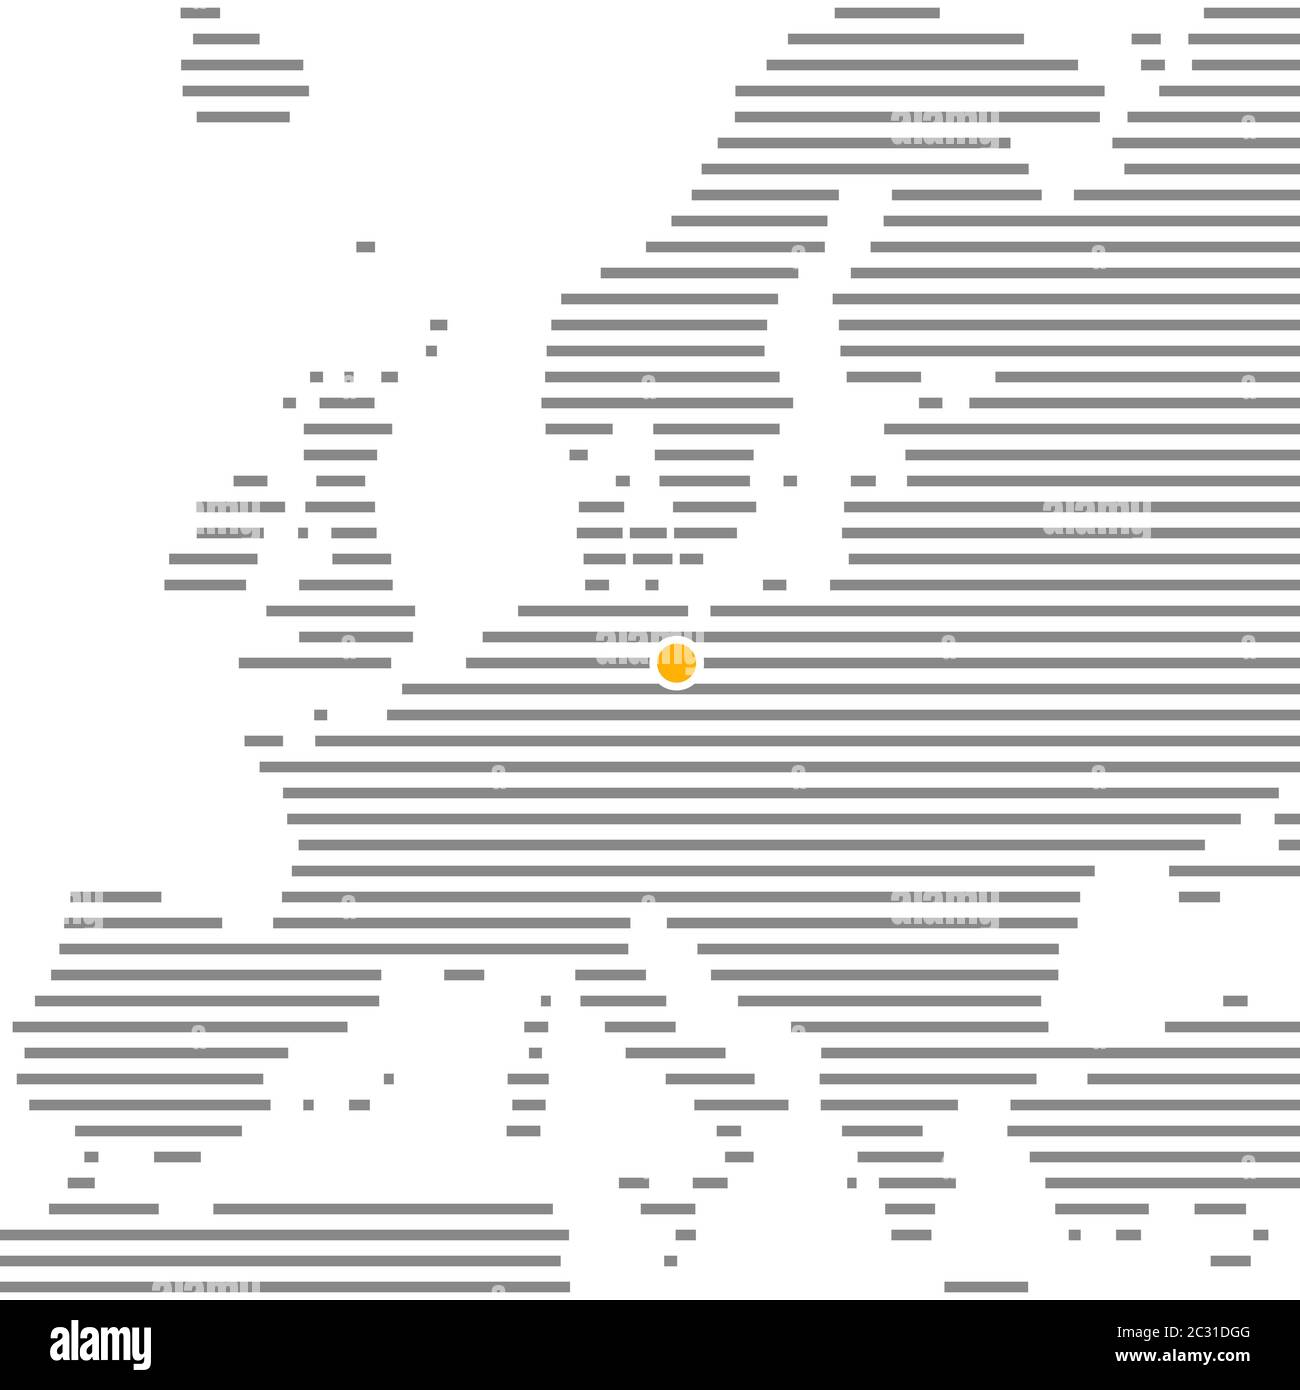 City Berlin in Germany on grey striped map of Europe with orange dot Stock Photo